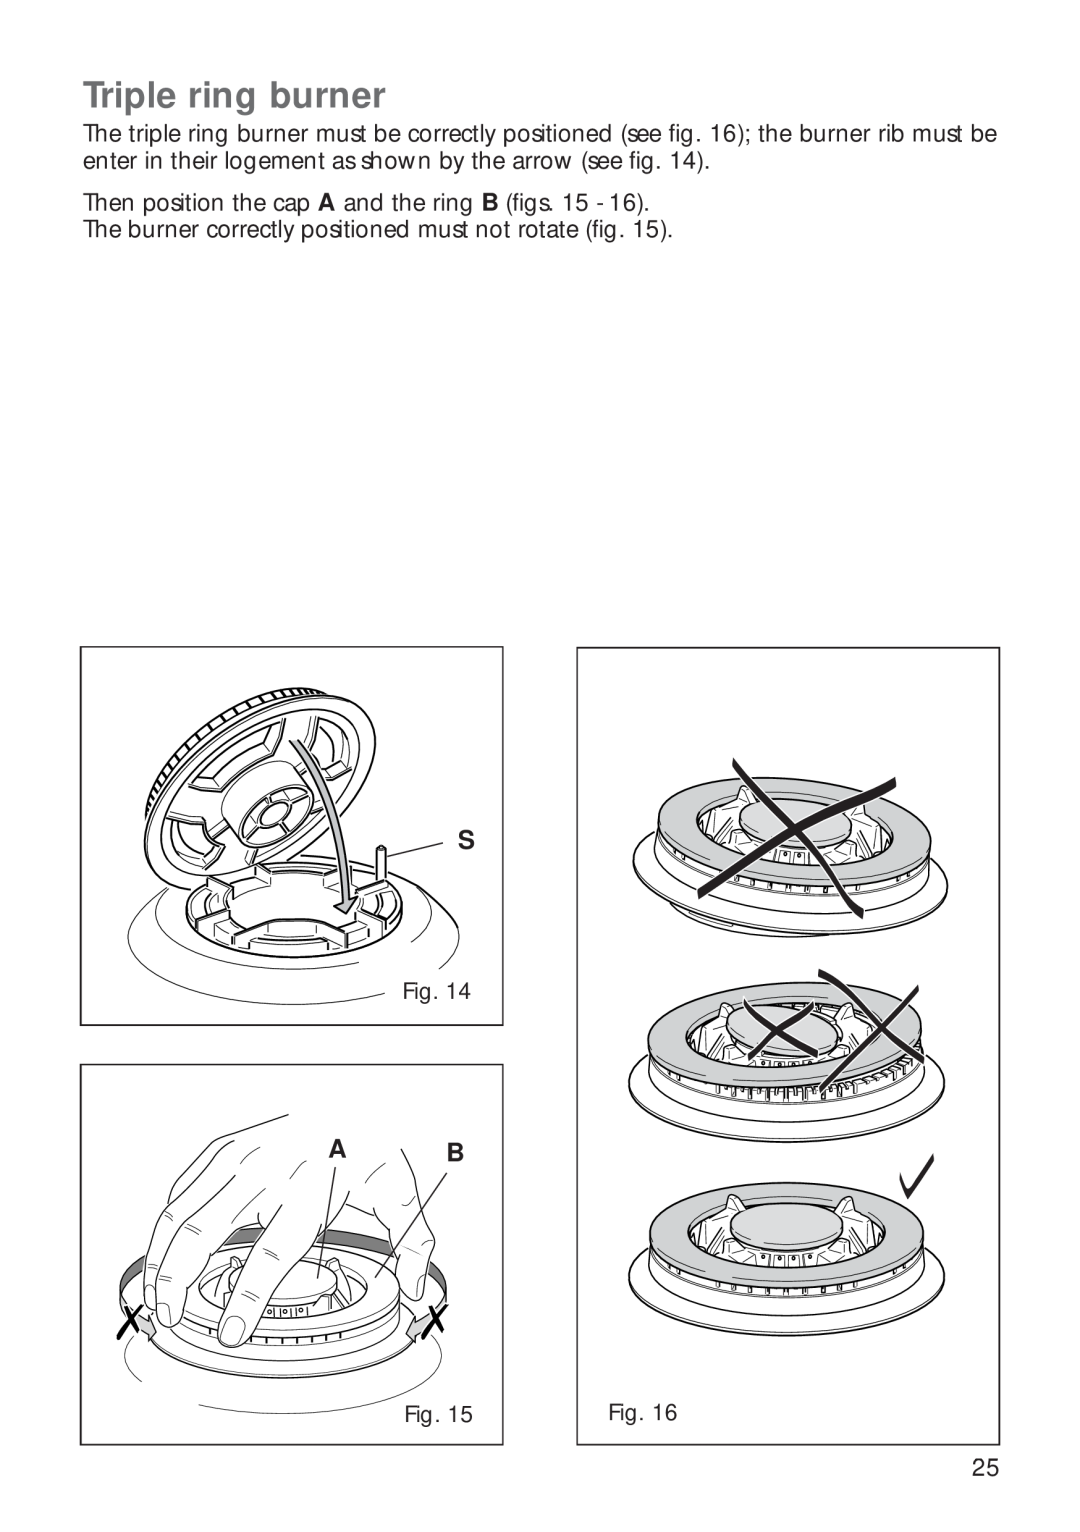 CDA RV 700 installation instructions Triple ring burner, Then position the cap A and the ring B figs 